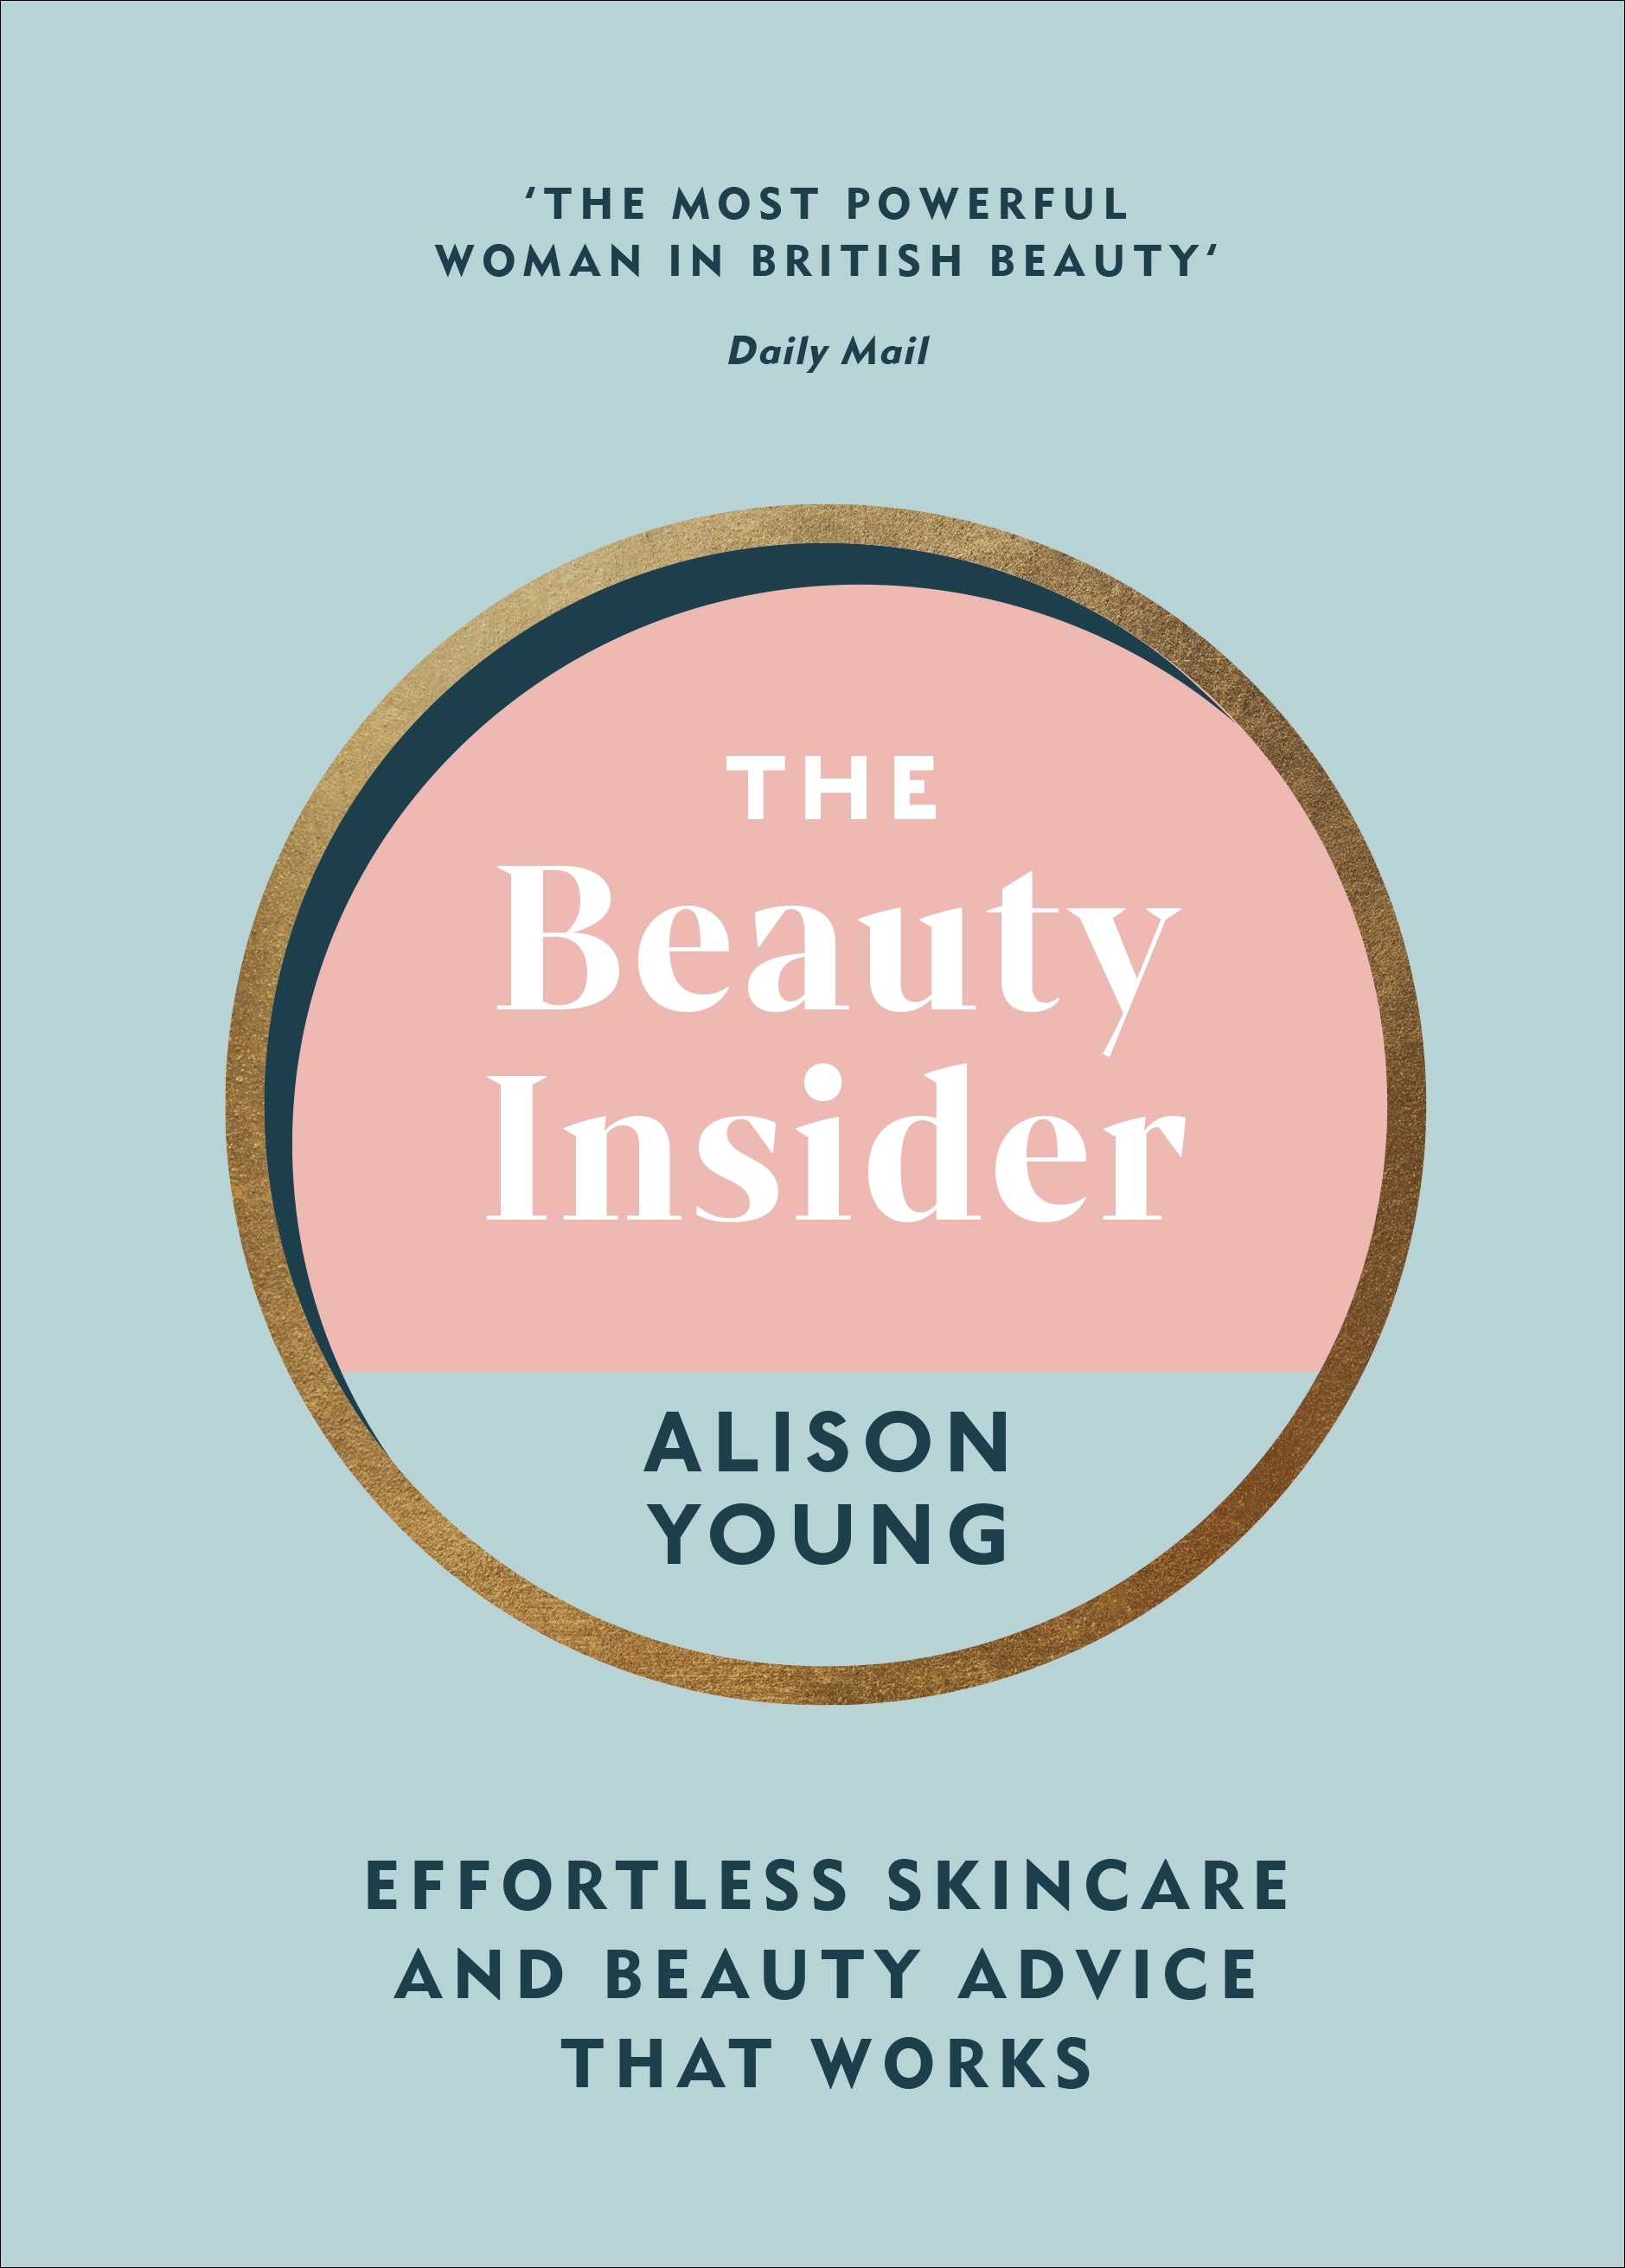 Book “The Beauty Insider” by Alison Young — June 3, 2021